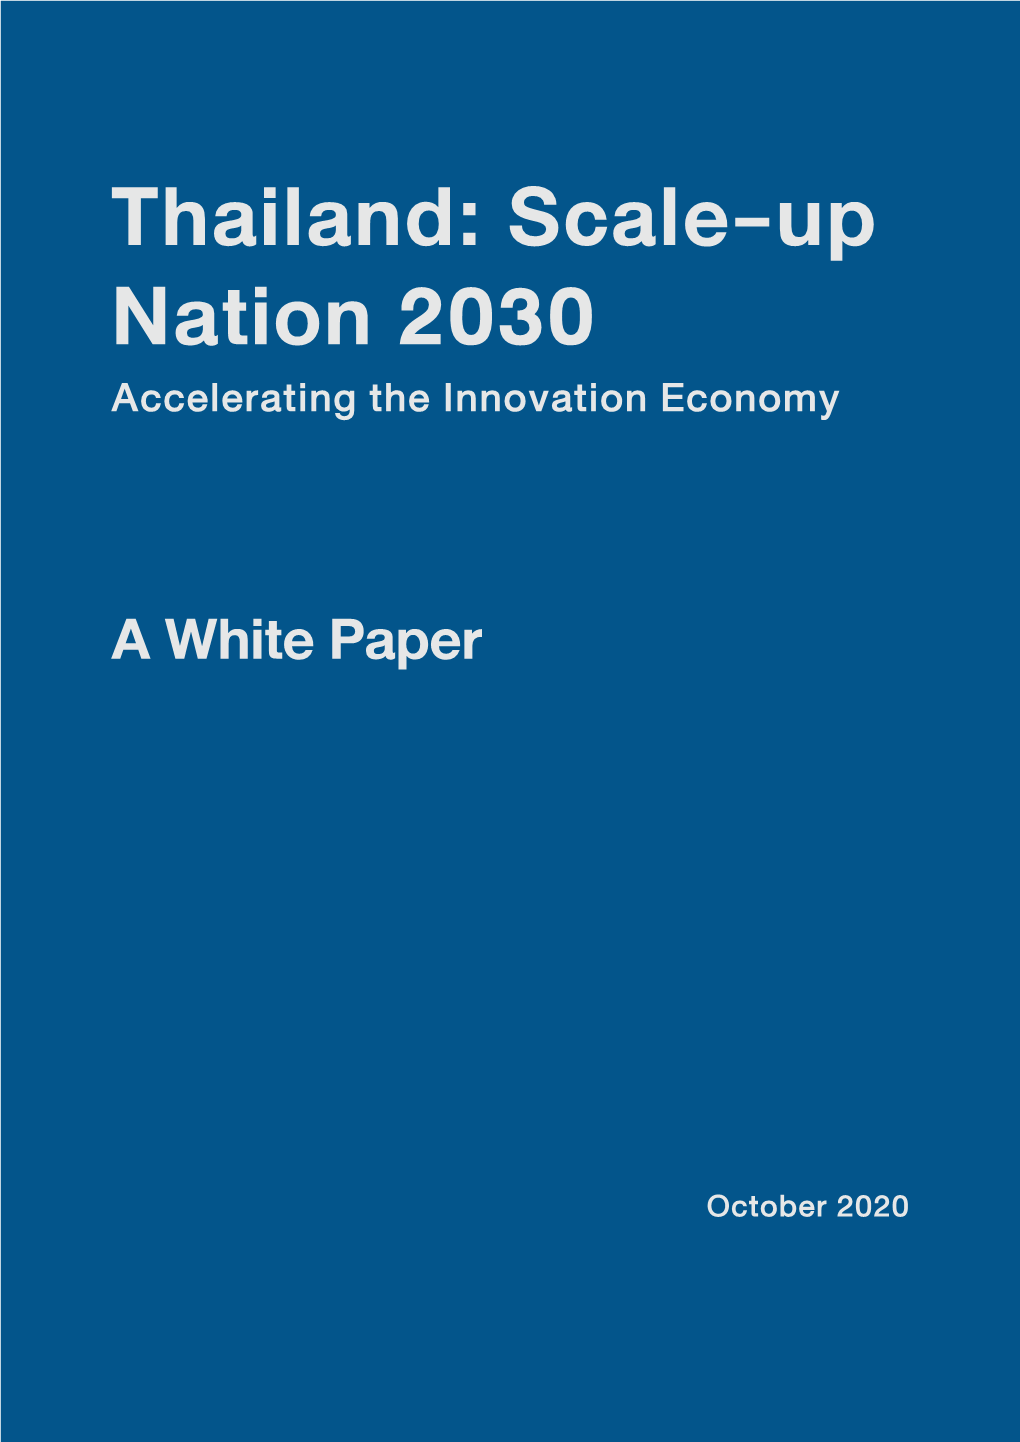 WP Thailand Scale-Up Nation 2030 ENG